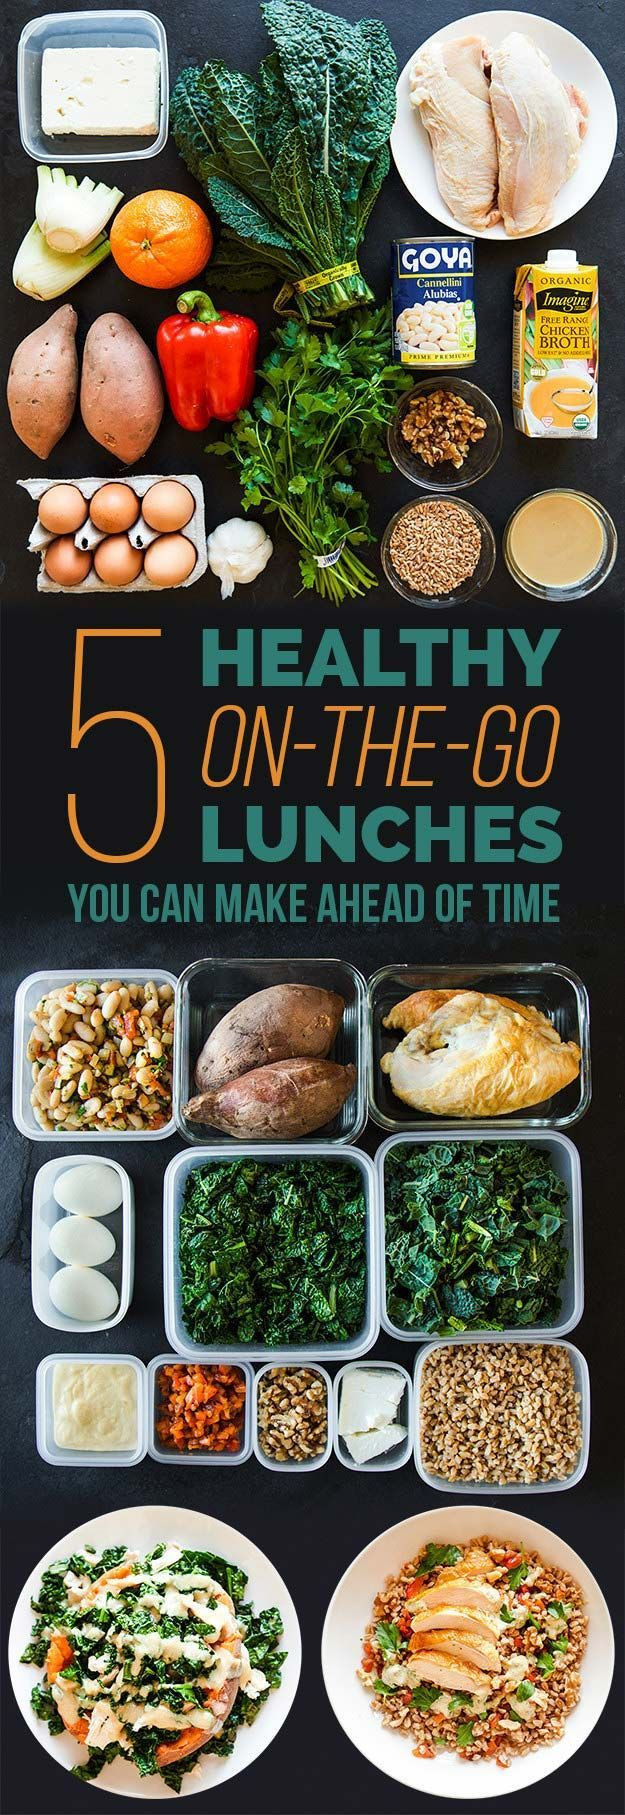 Cheap Healthy Lunches For Work
 25 best ideas about Cheap school lunches on Pinterest